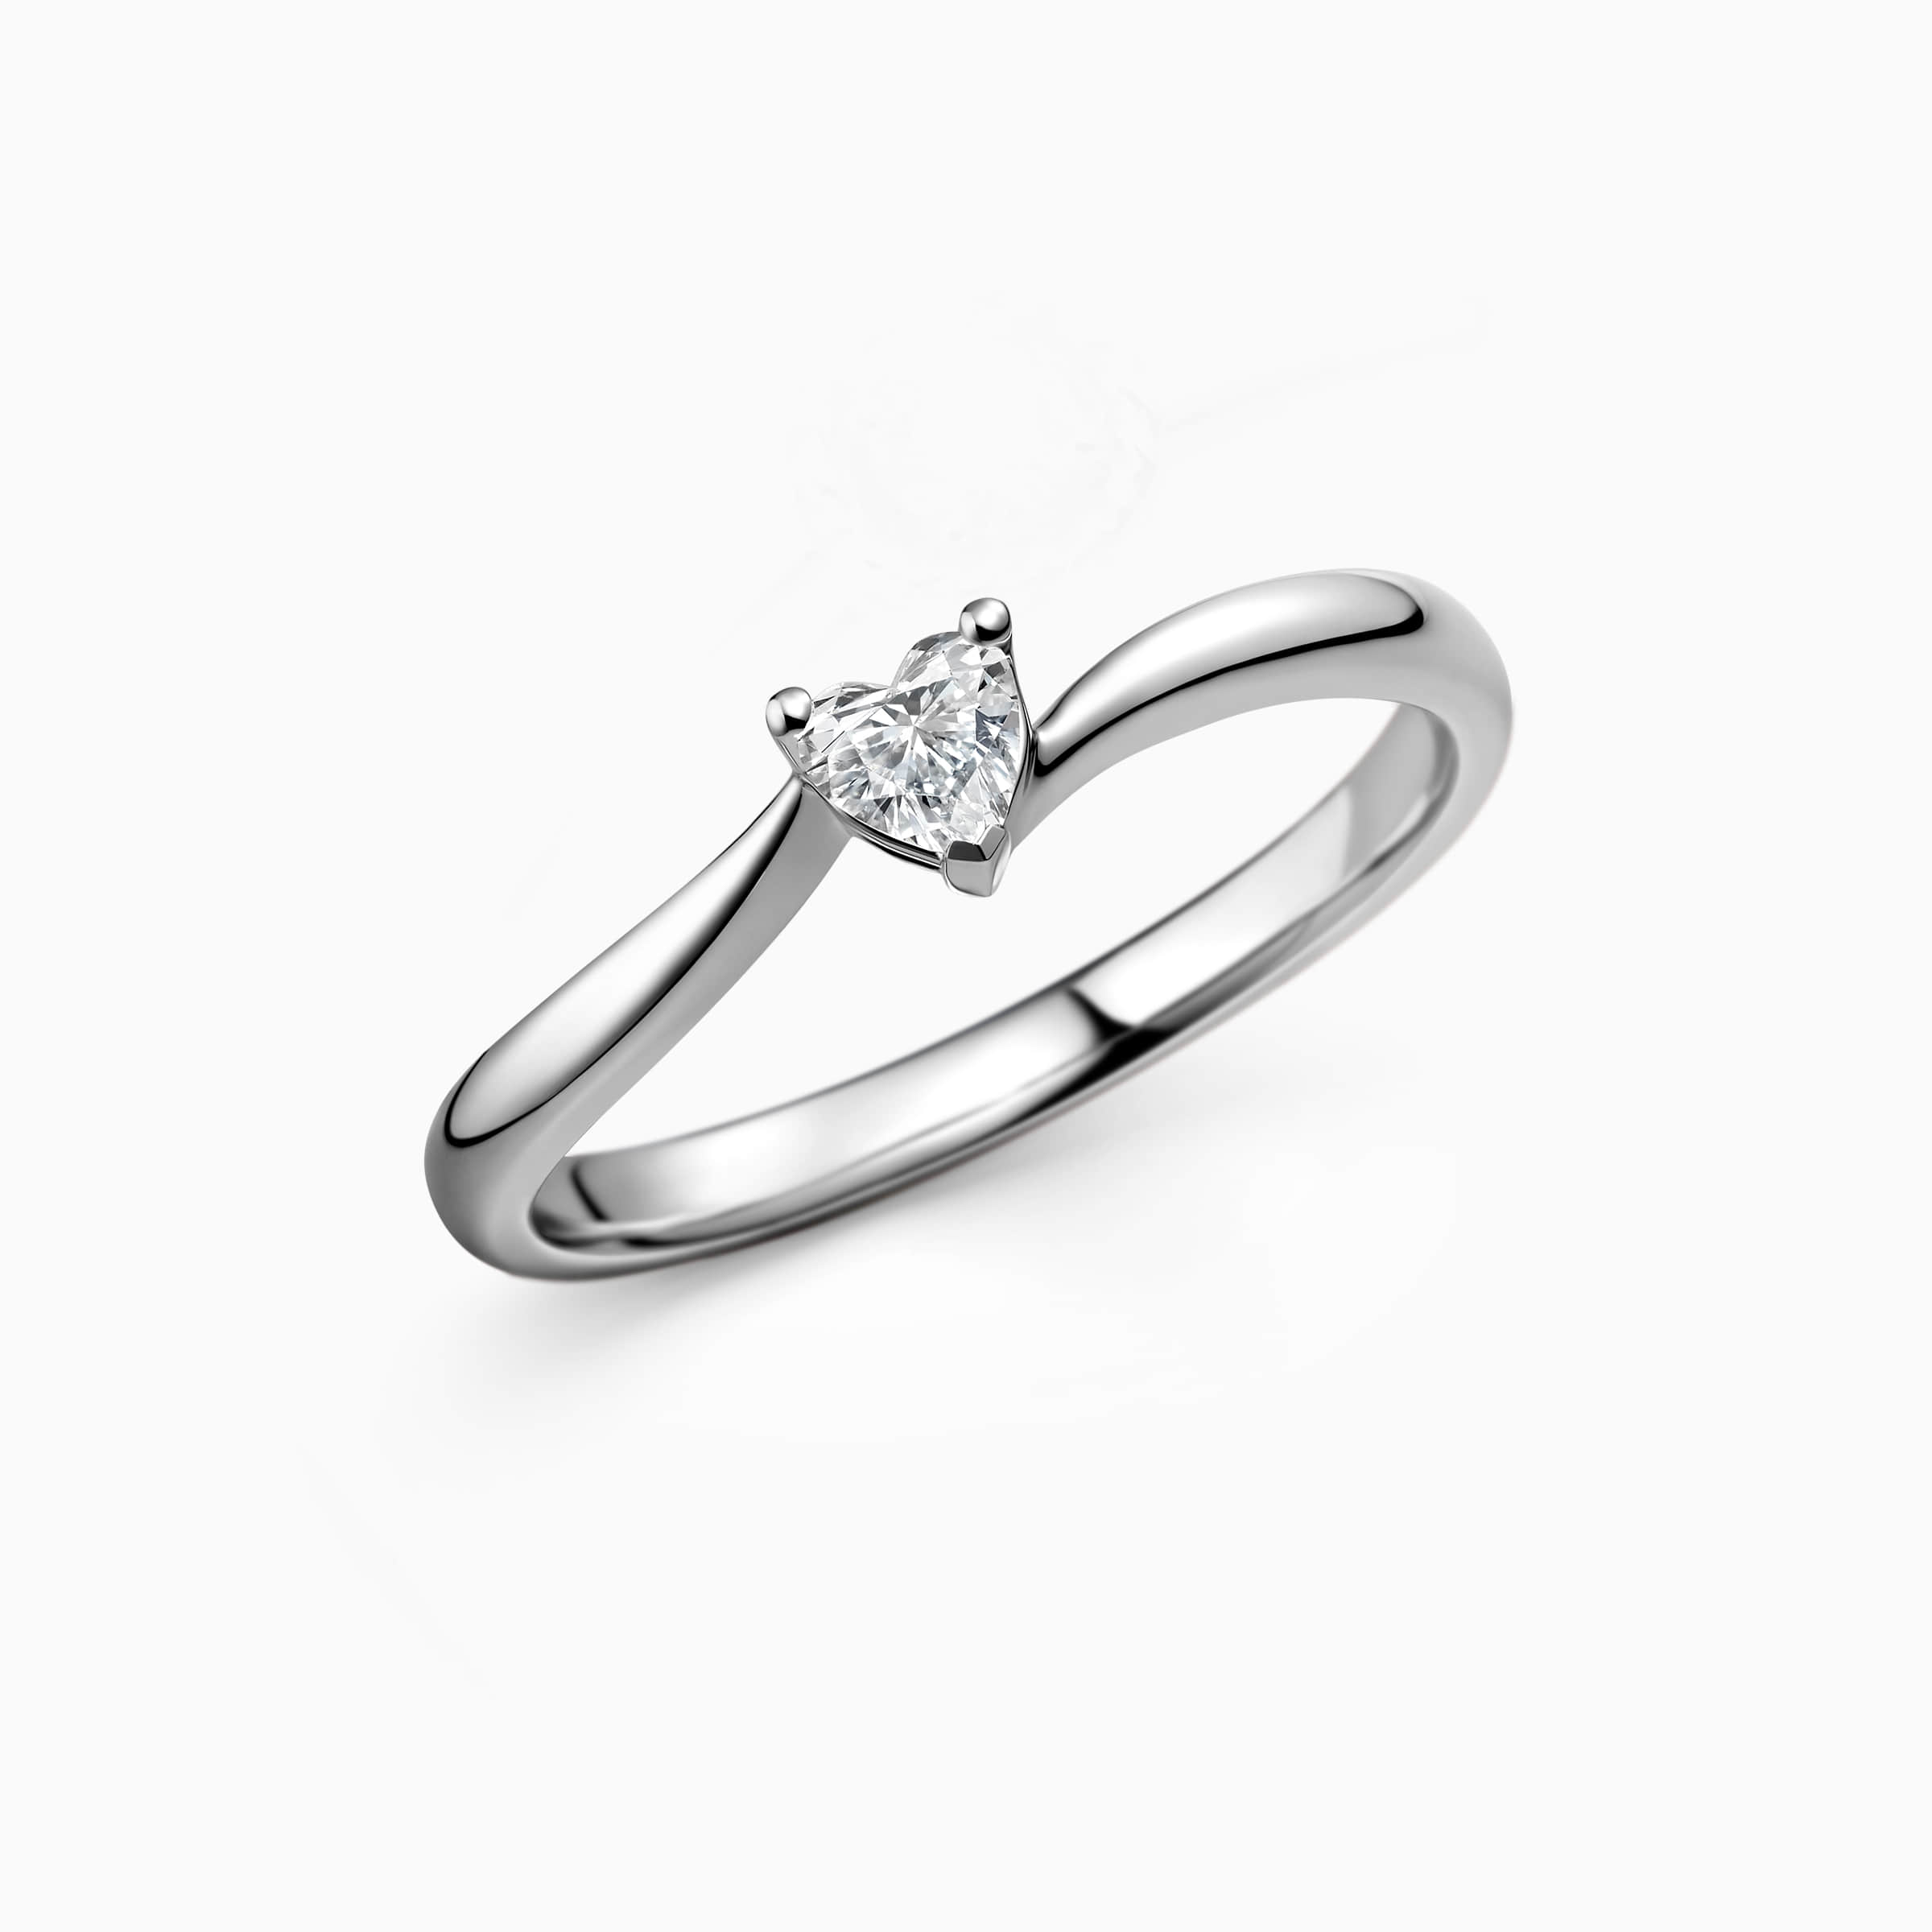 darry ring heart shaped solitaire engagement ring angle view